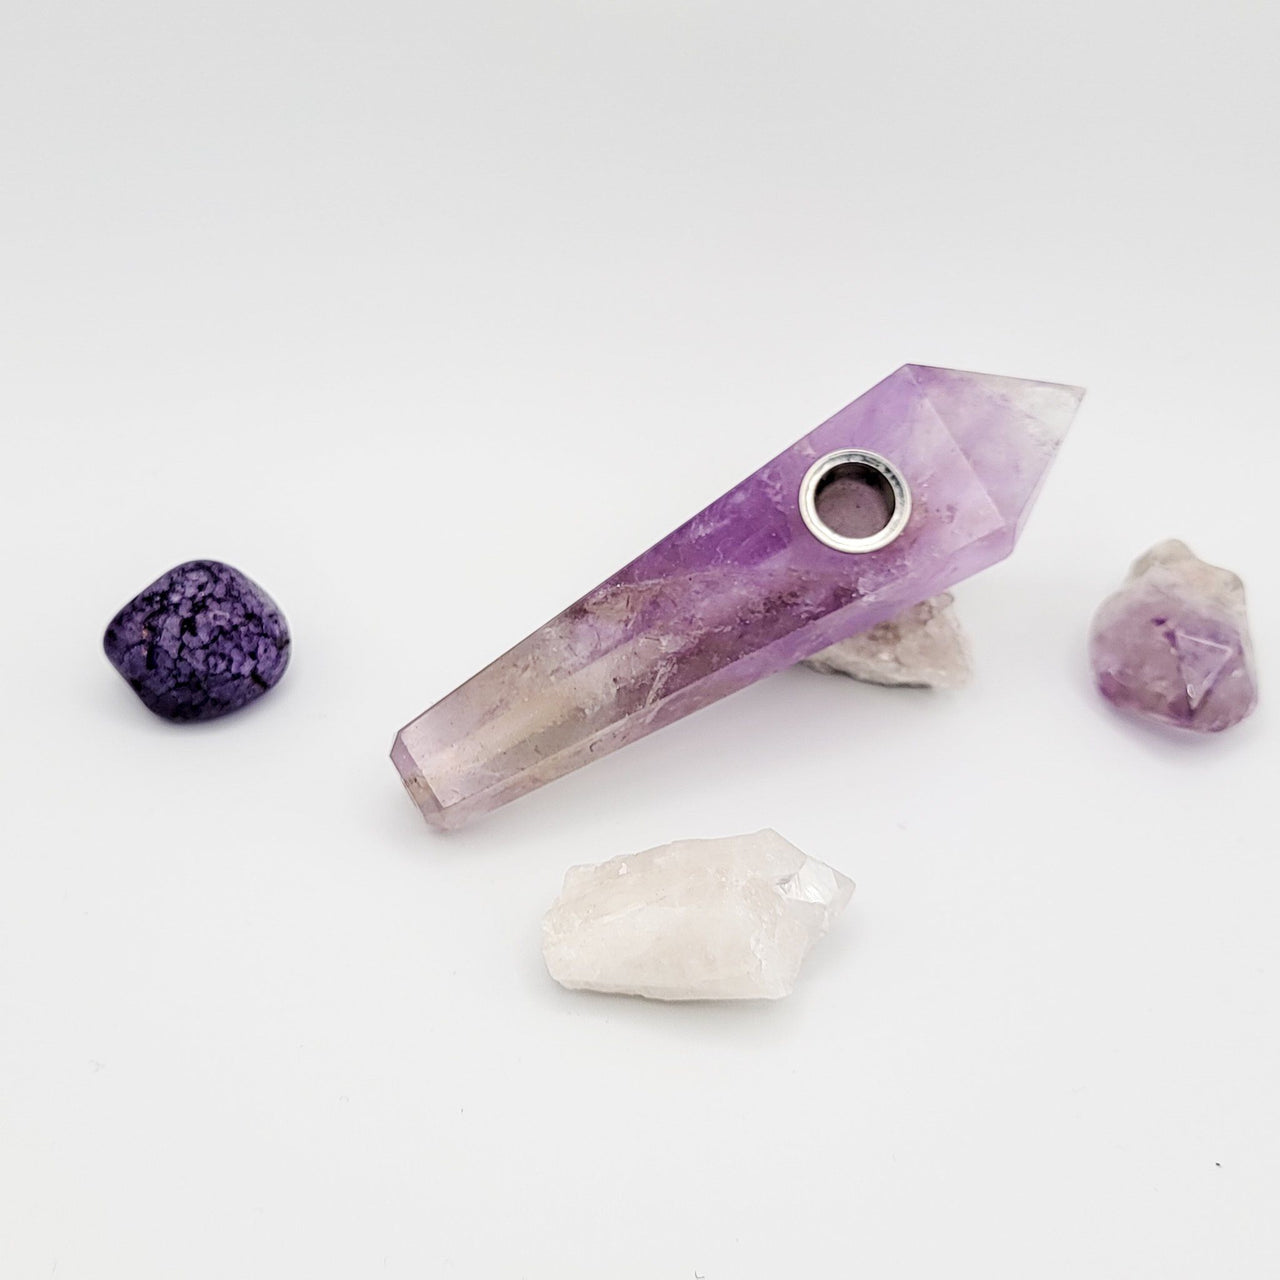 Amethyst Crystal Pipe, pairs well with a rose quartz pipe and labradorite crystal pipe, use search function to find other beautiful crystal pipes